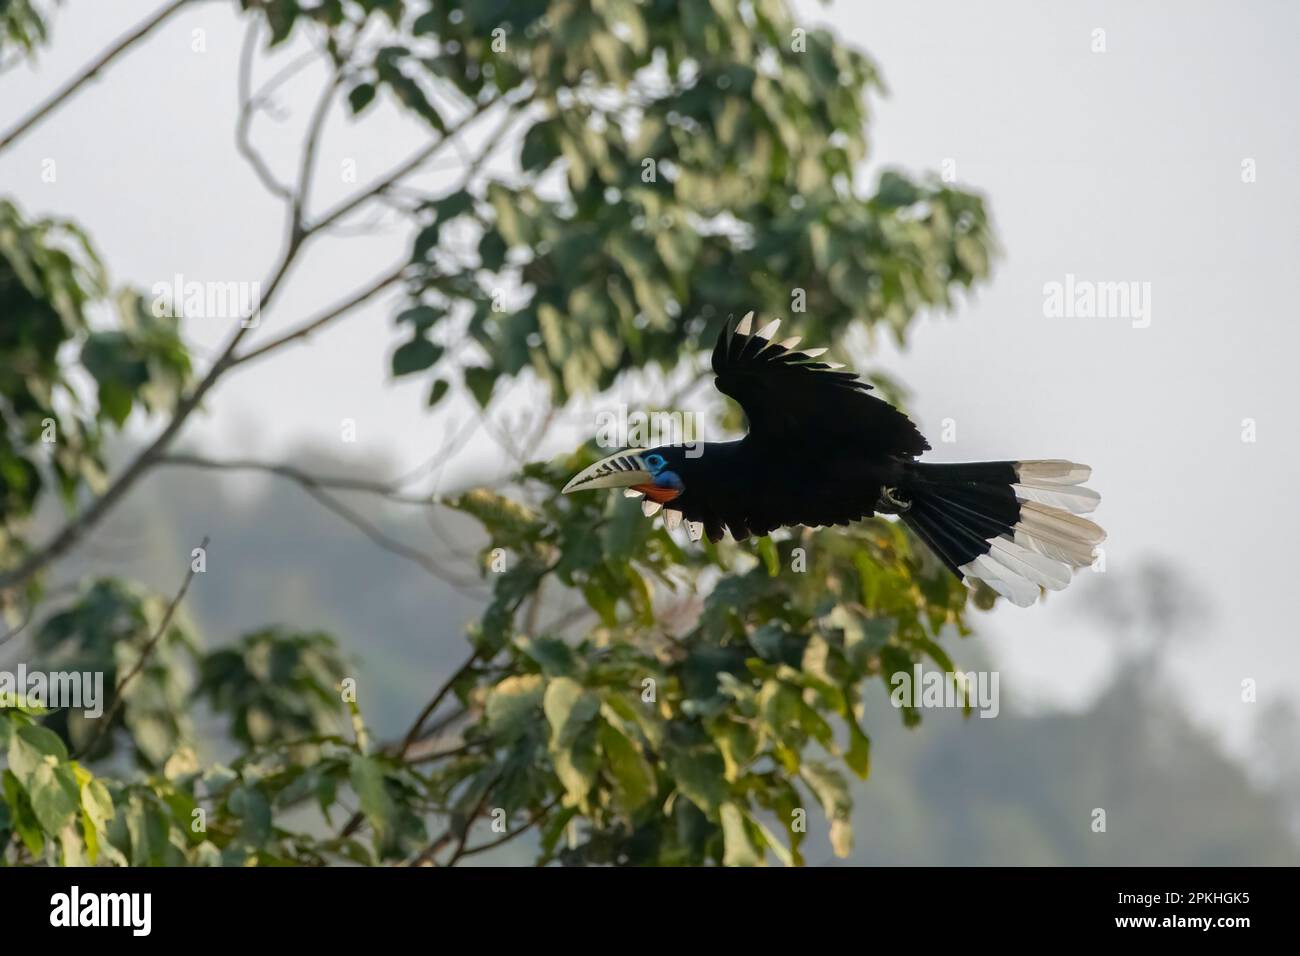 A female rufous-necked hornbill (Aceros nipalensis) observed in flight in Latpanchar in West Bengal, India Stock Photo